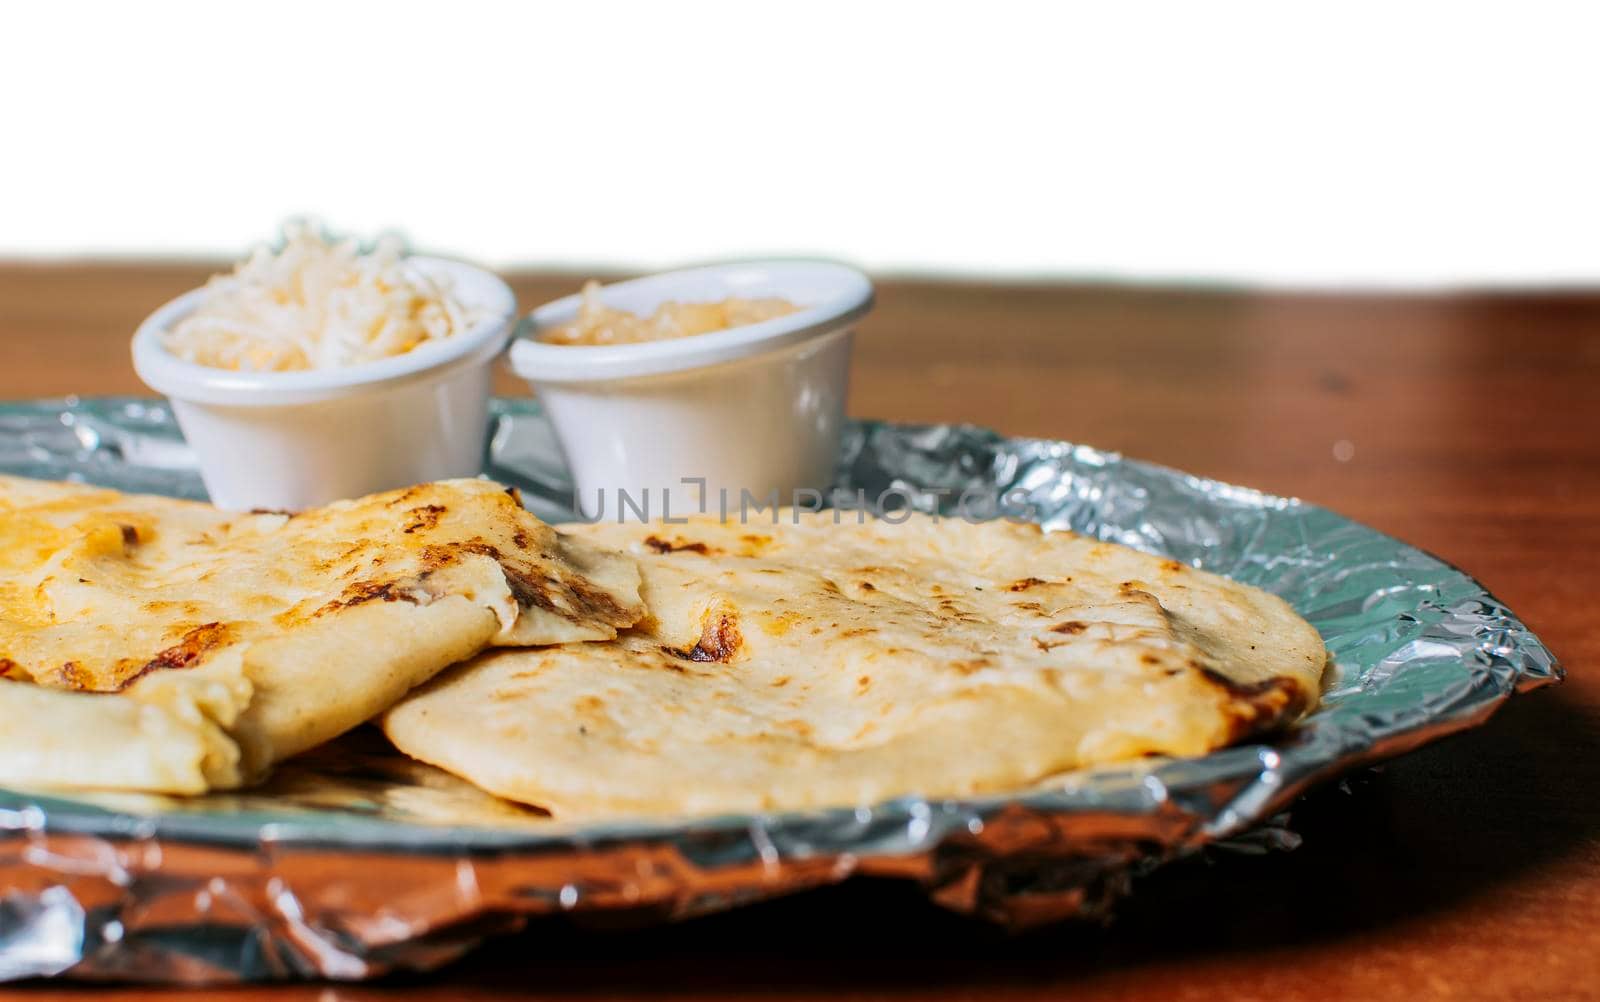 Two traditional pupusas served with salad on the table. Two Nicaraguan pupusas with salad isolated, Side view of delicious Salvadoran pupusas with cheese served on the table.